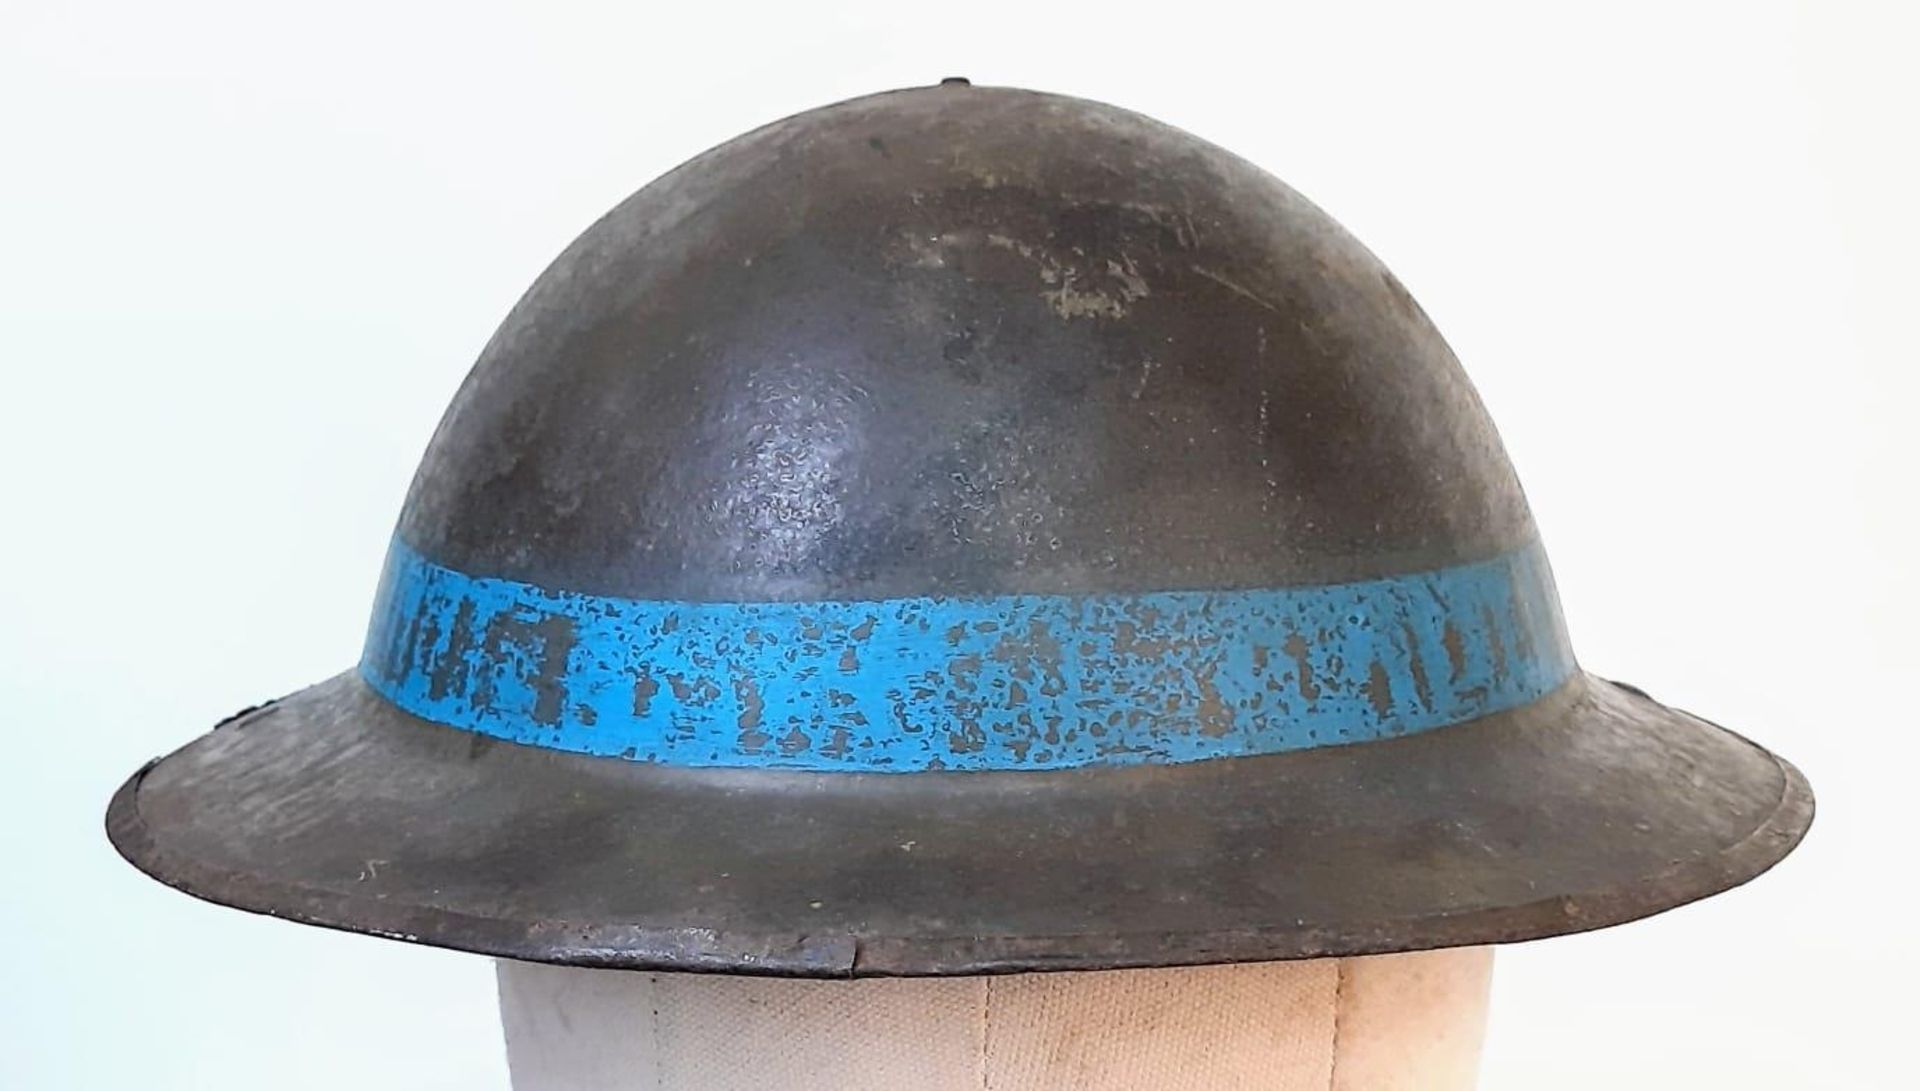 WW1 British Brodie Helmet with Blue Band for the 1st Bn East Yorks circa 1918. Lots of the - Image 3 of 7